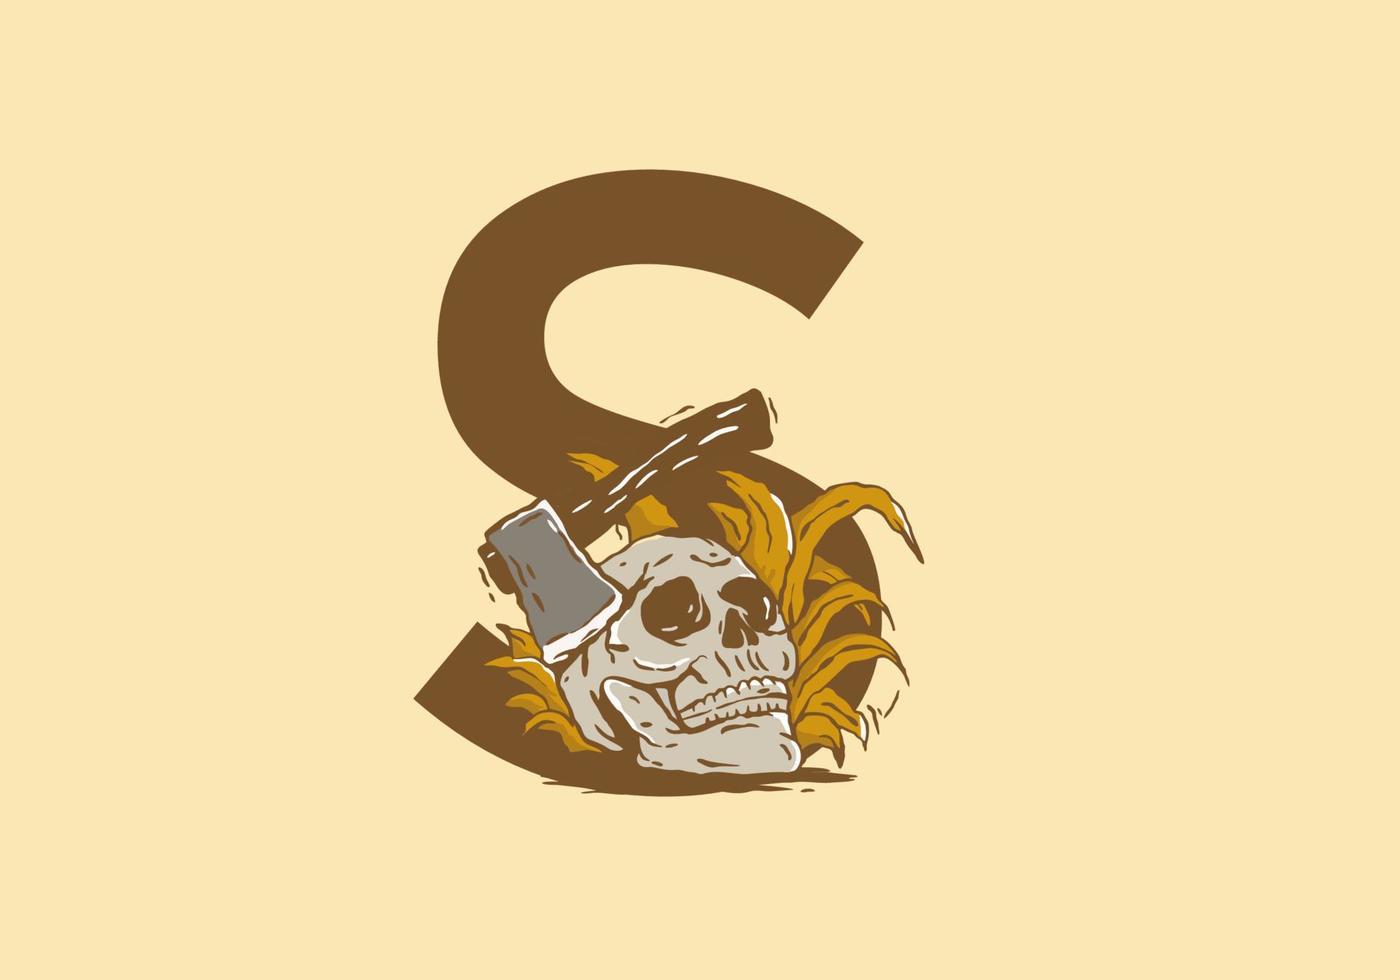 Skeleton head and ax illustration drawing with S initial letter vector